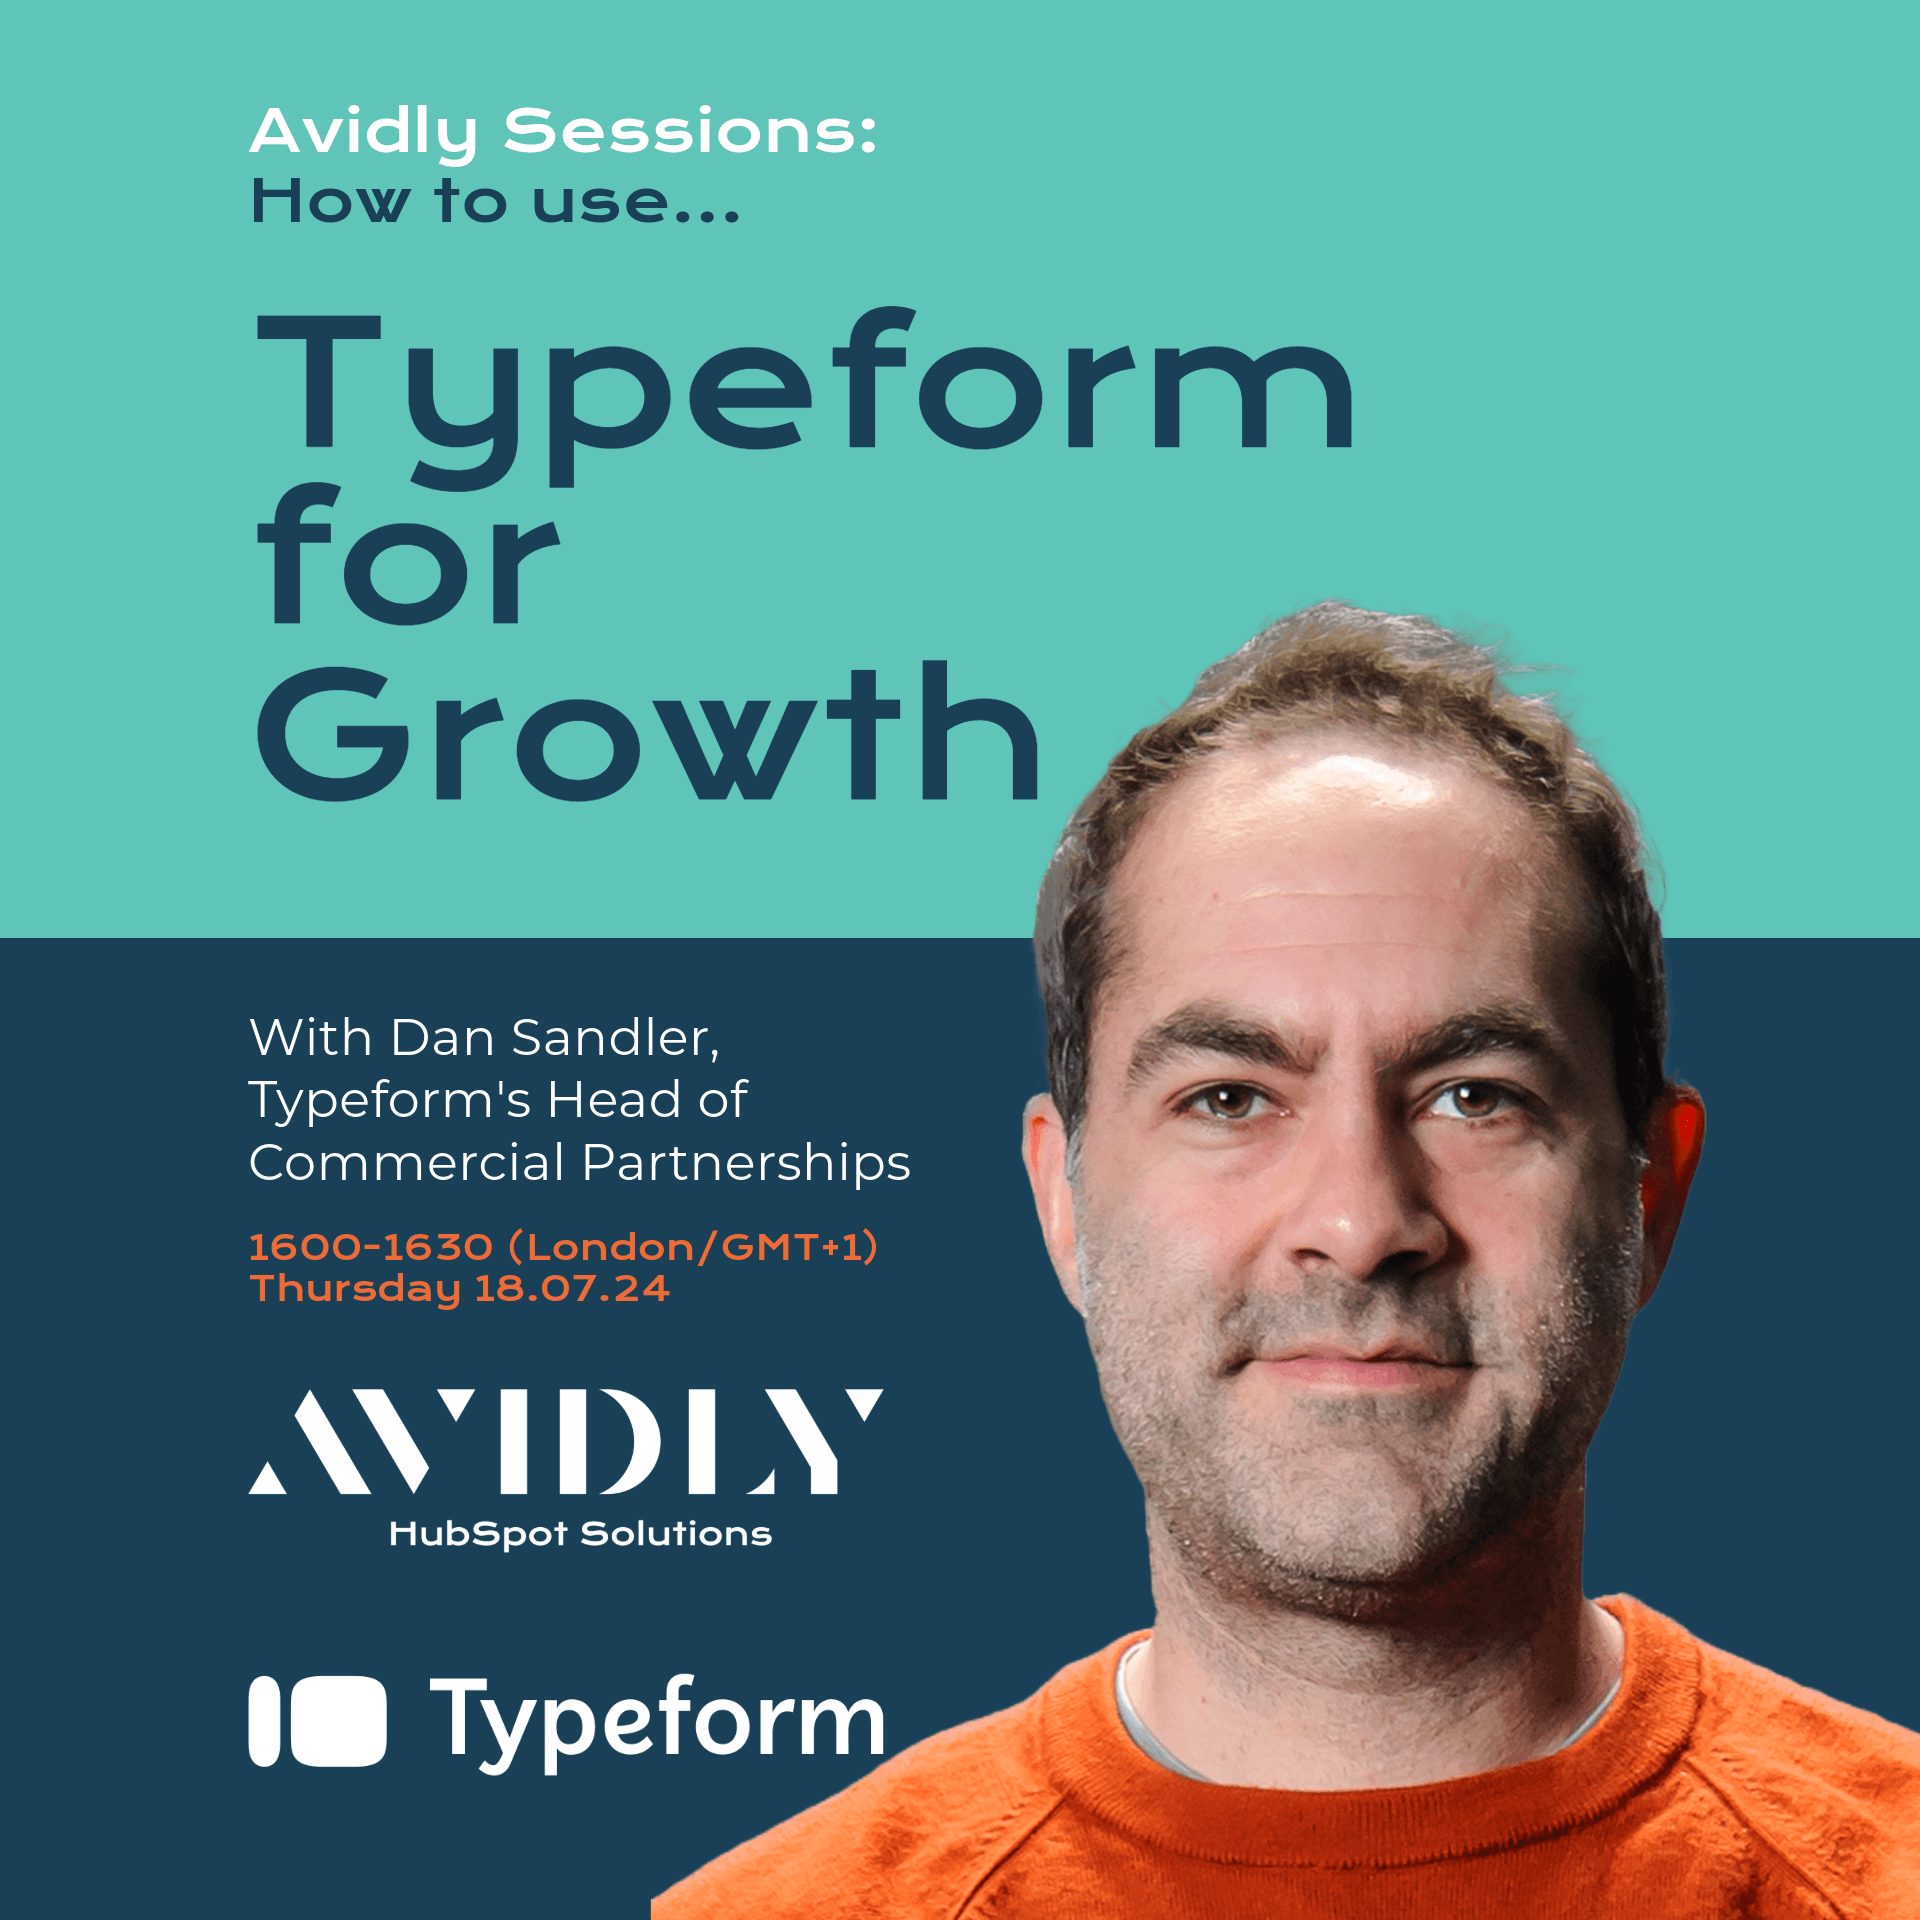 Avidly Sessions How to overview full series image-12-Avidly Session Typeform for Growth 1080x1920